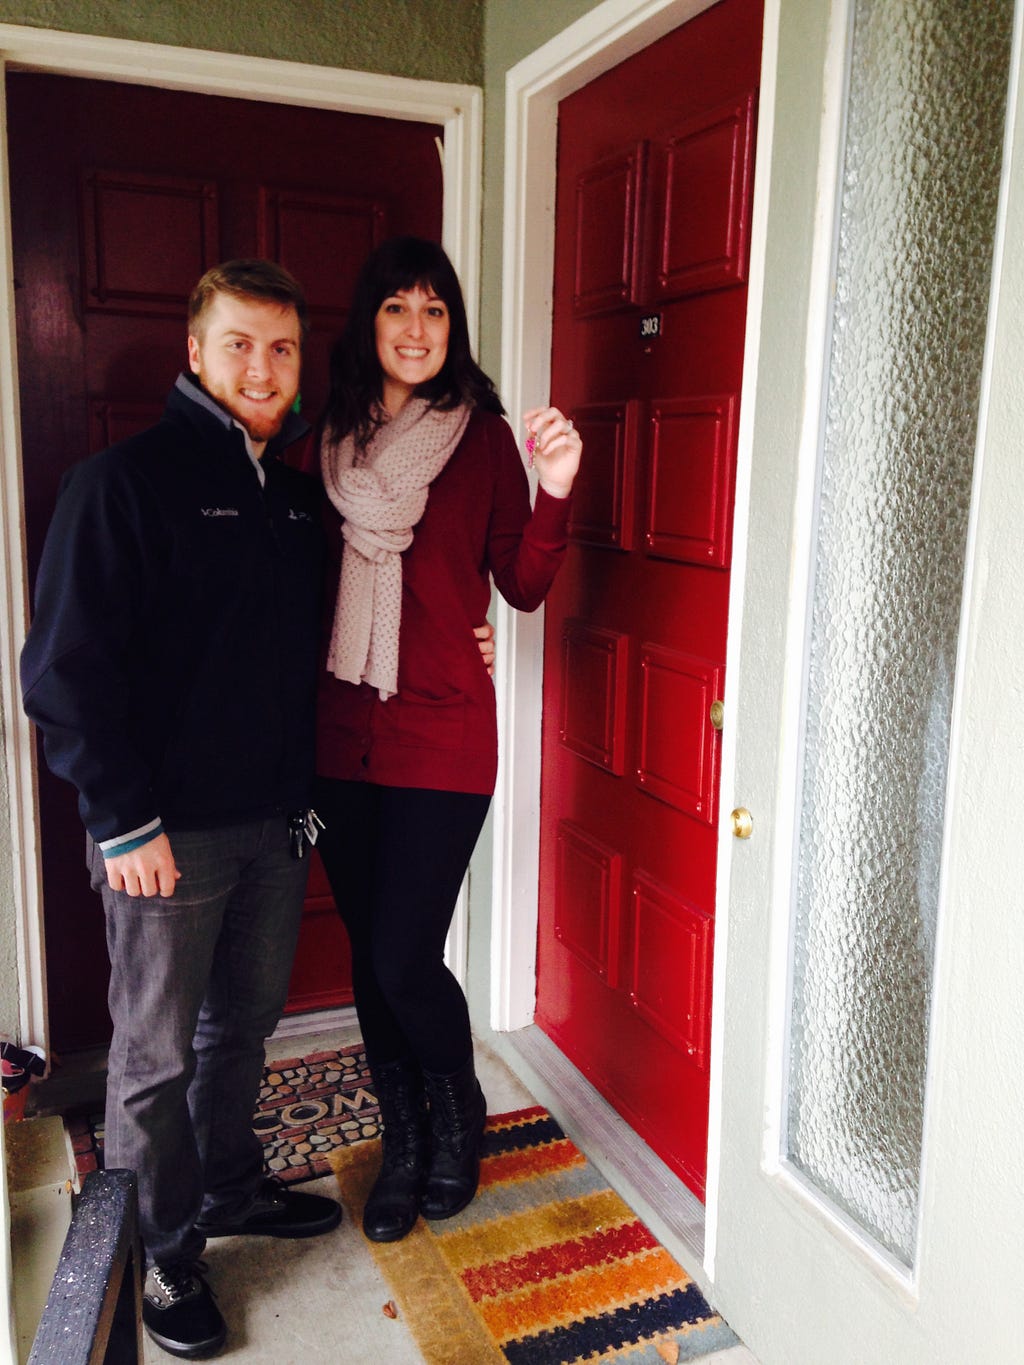 Standing in front of our first home with the keys!